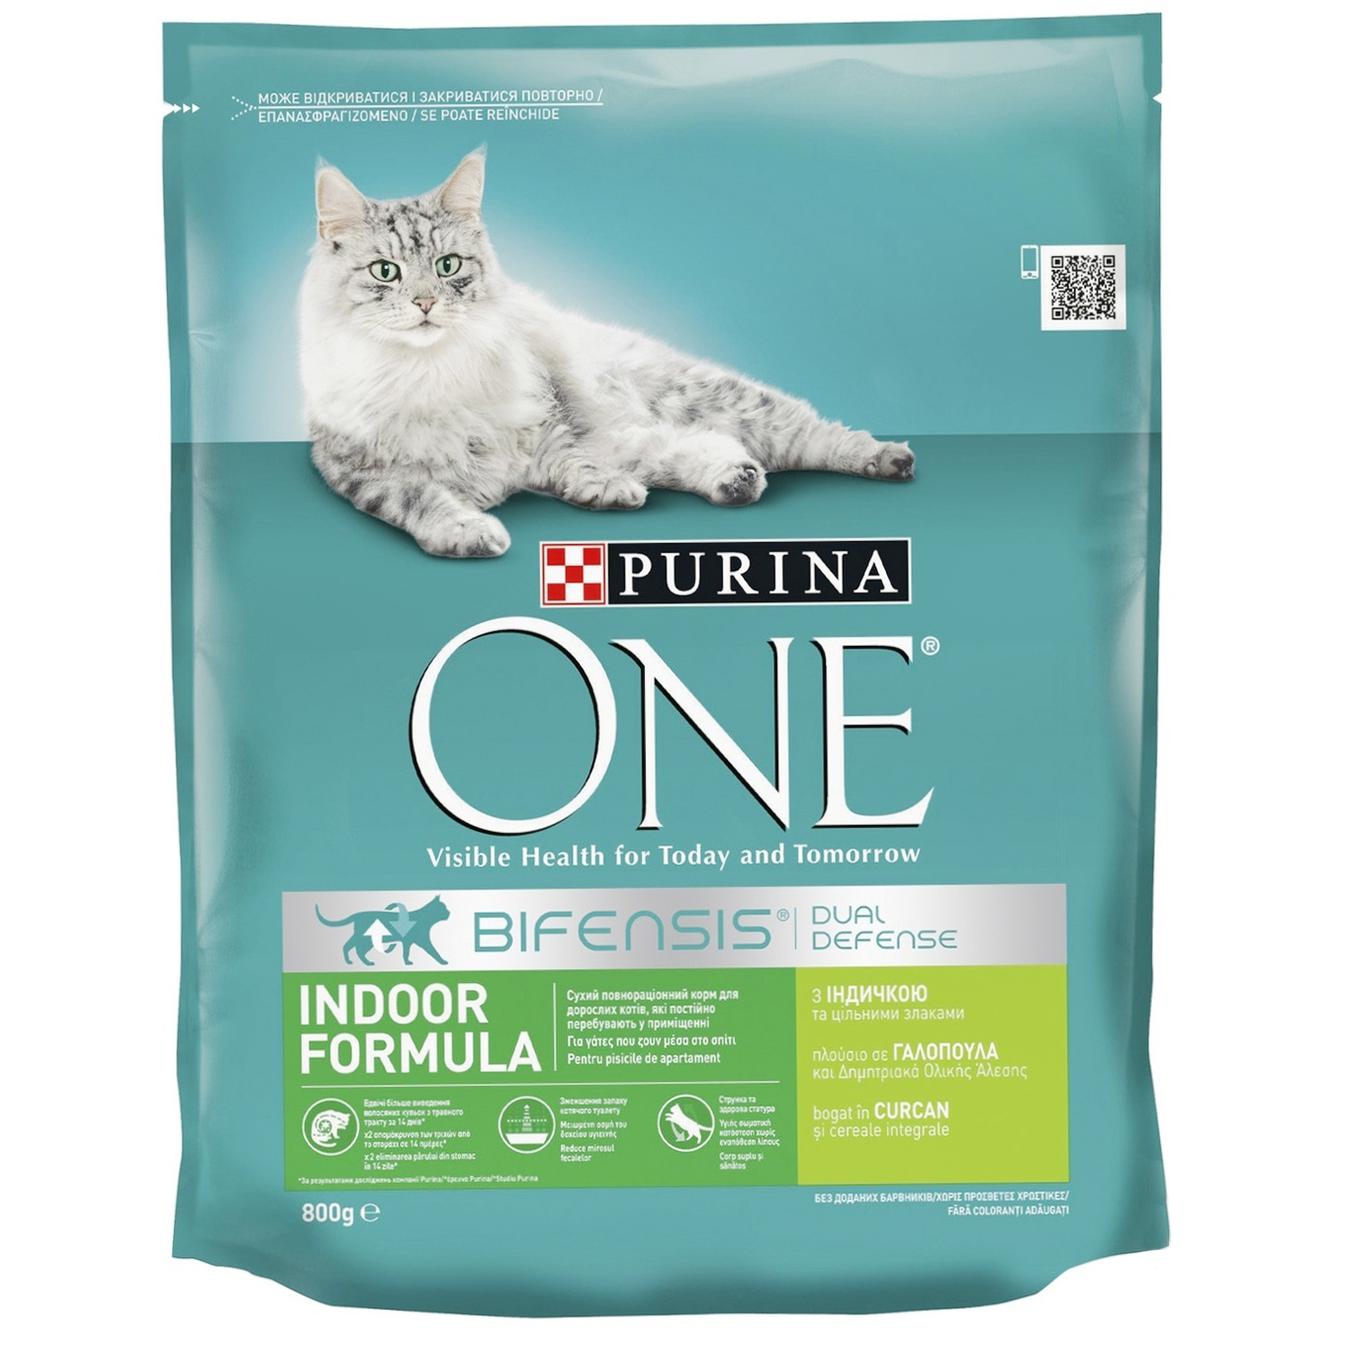 Purina One Indoor Turkey Dry For Cats Food 800g